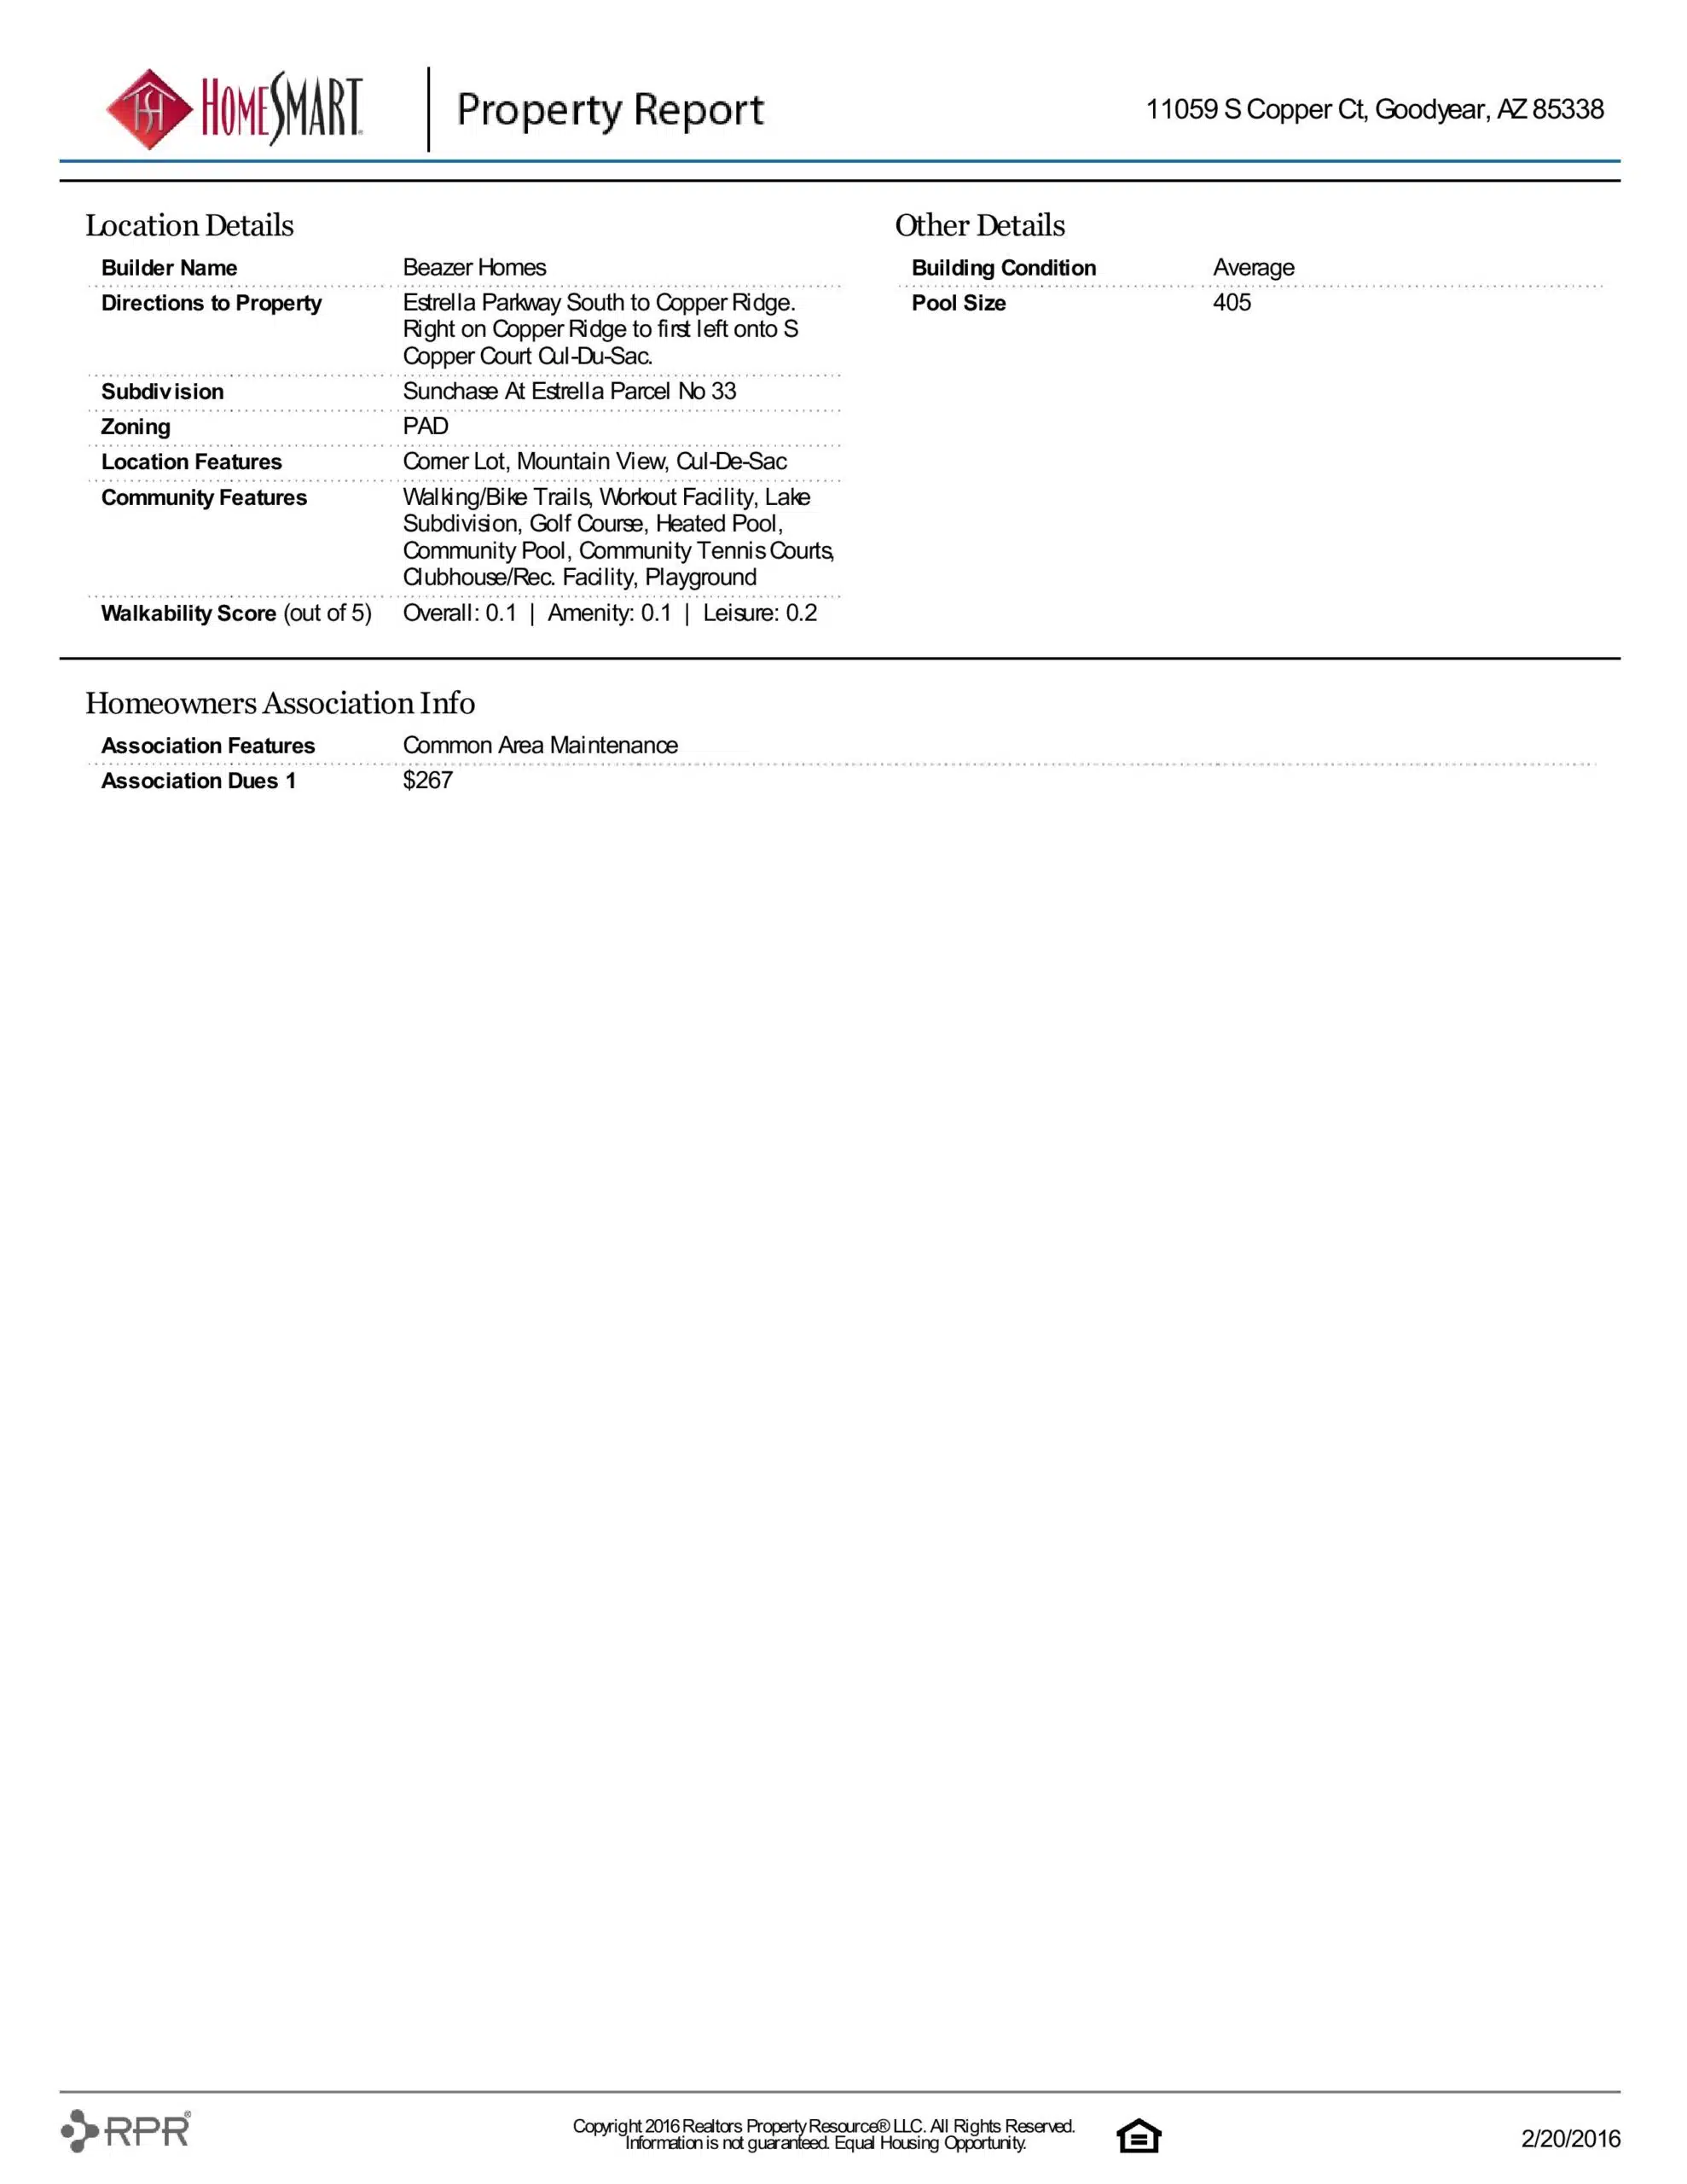 11059 S COPPER CT PROPERTY REPORT-page-005